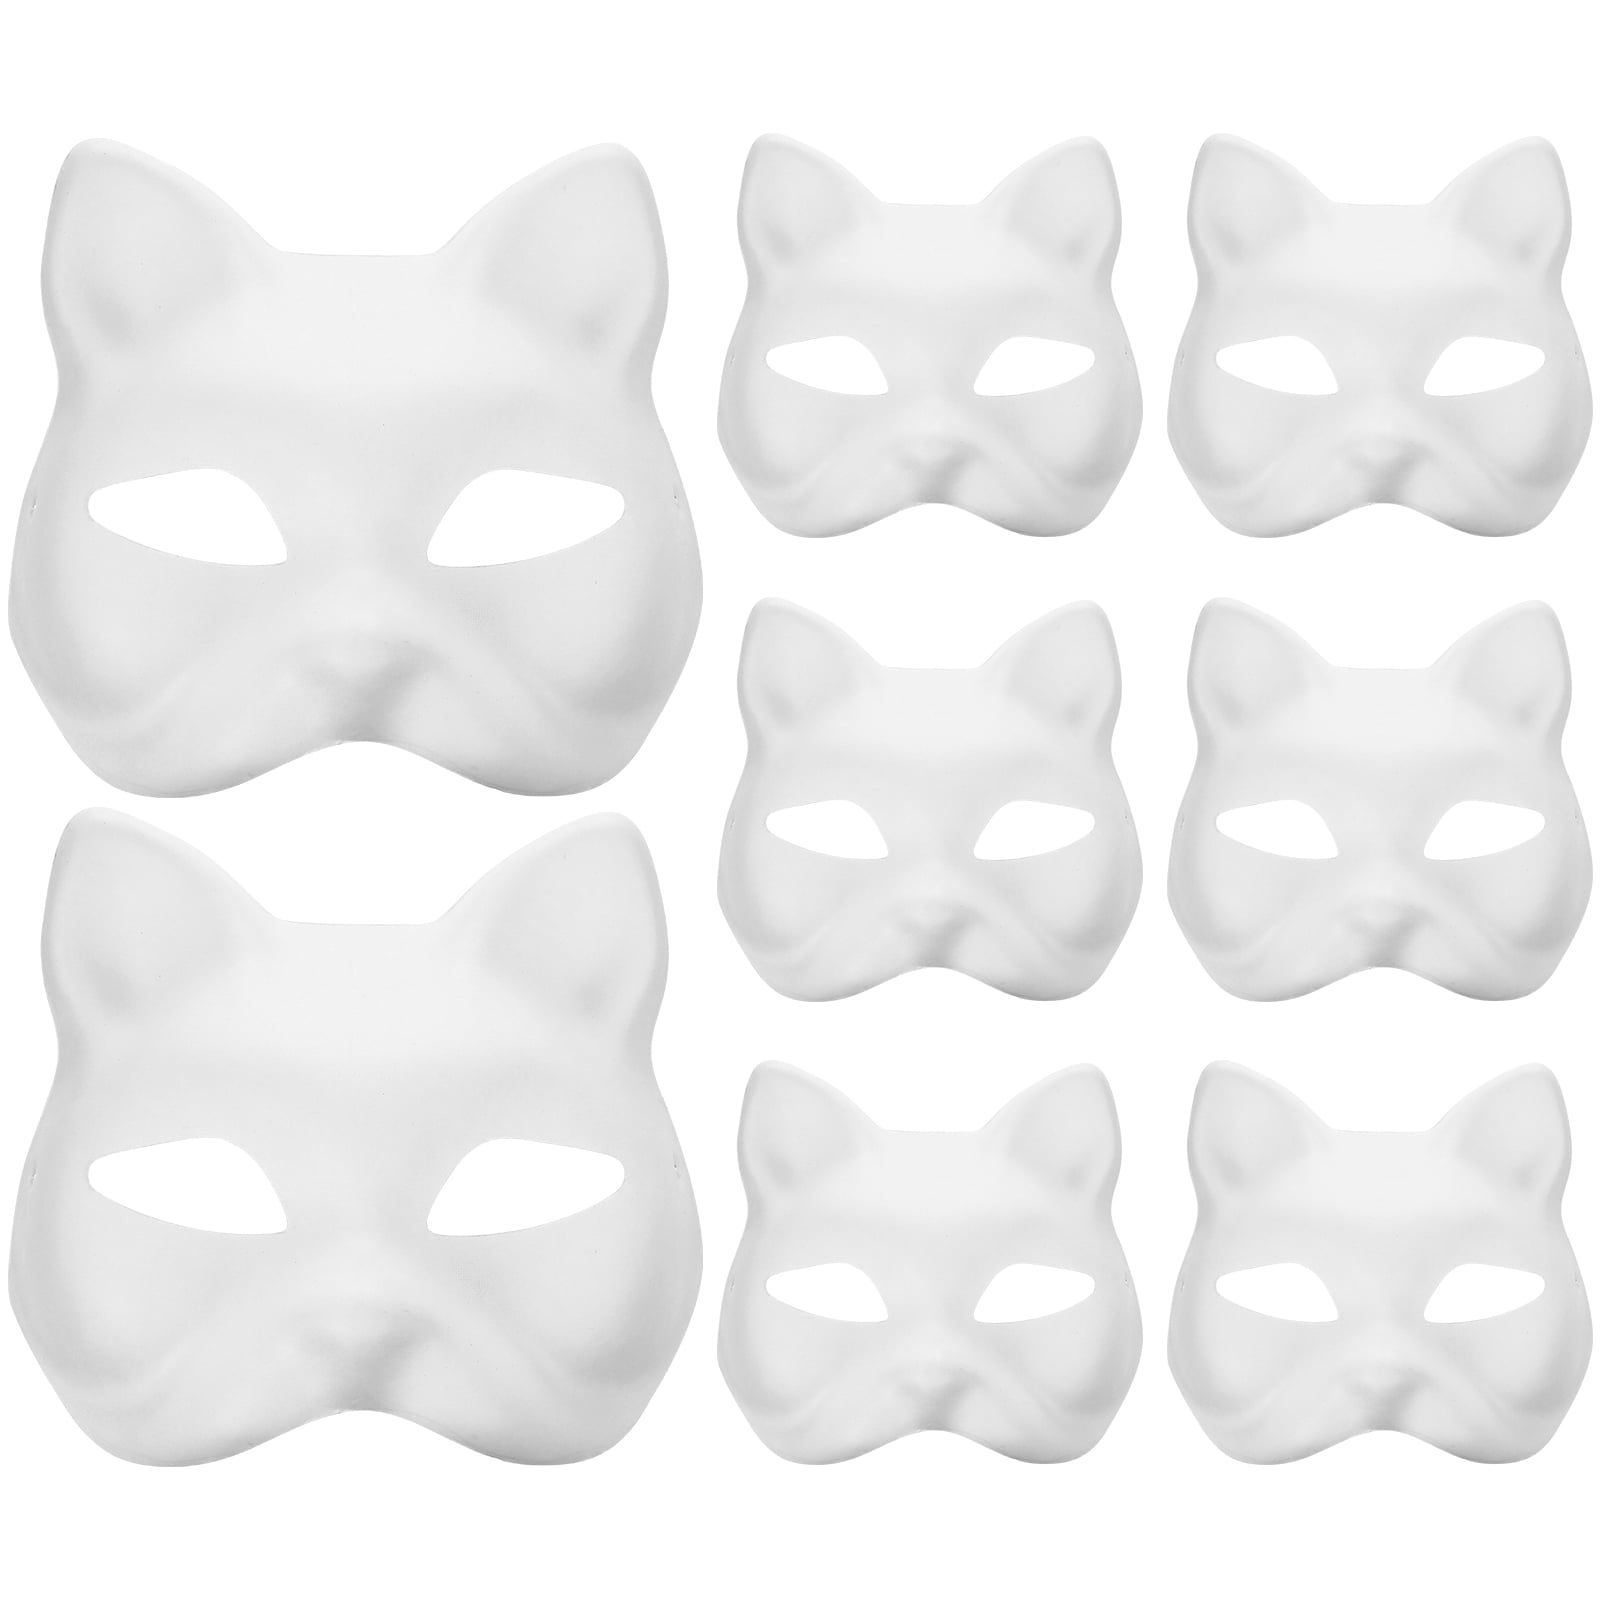 Pulp Blank Mask White Masks Cat Fancy Dress for Adults Art Painting ...